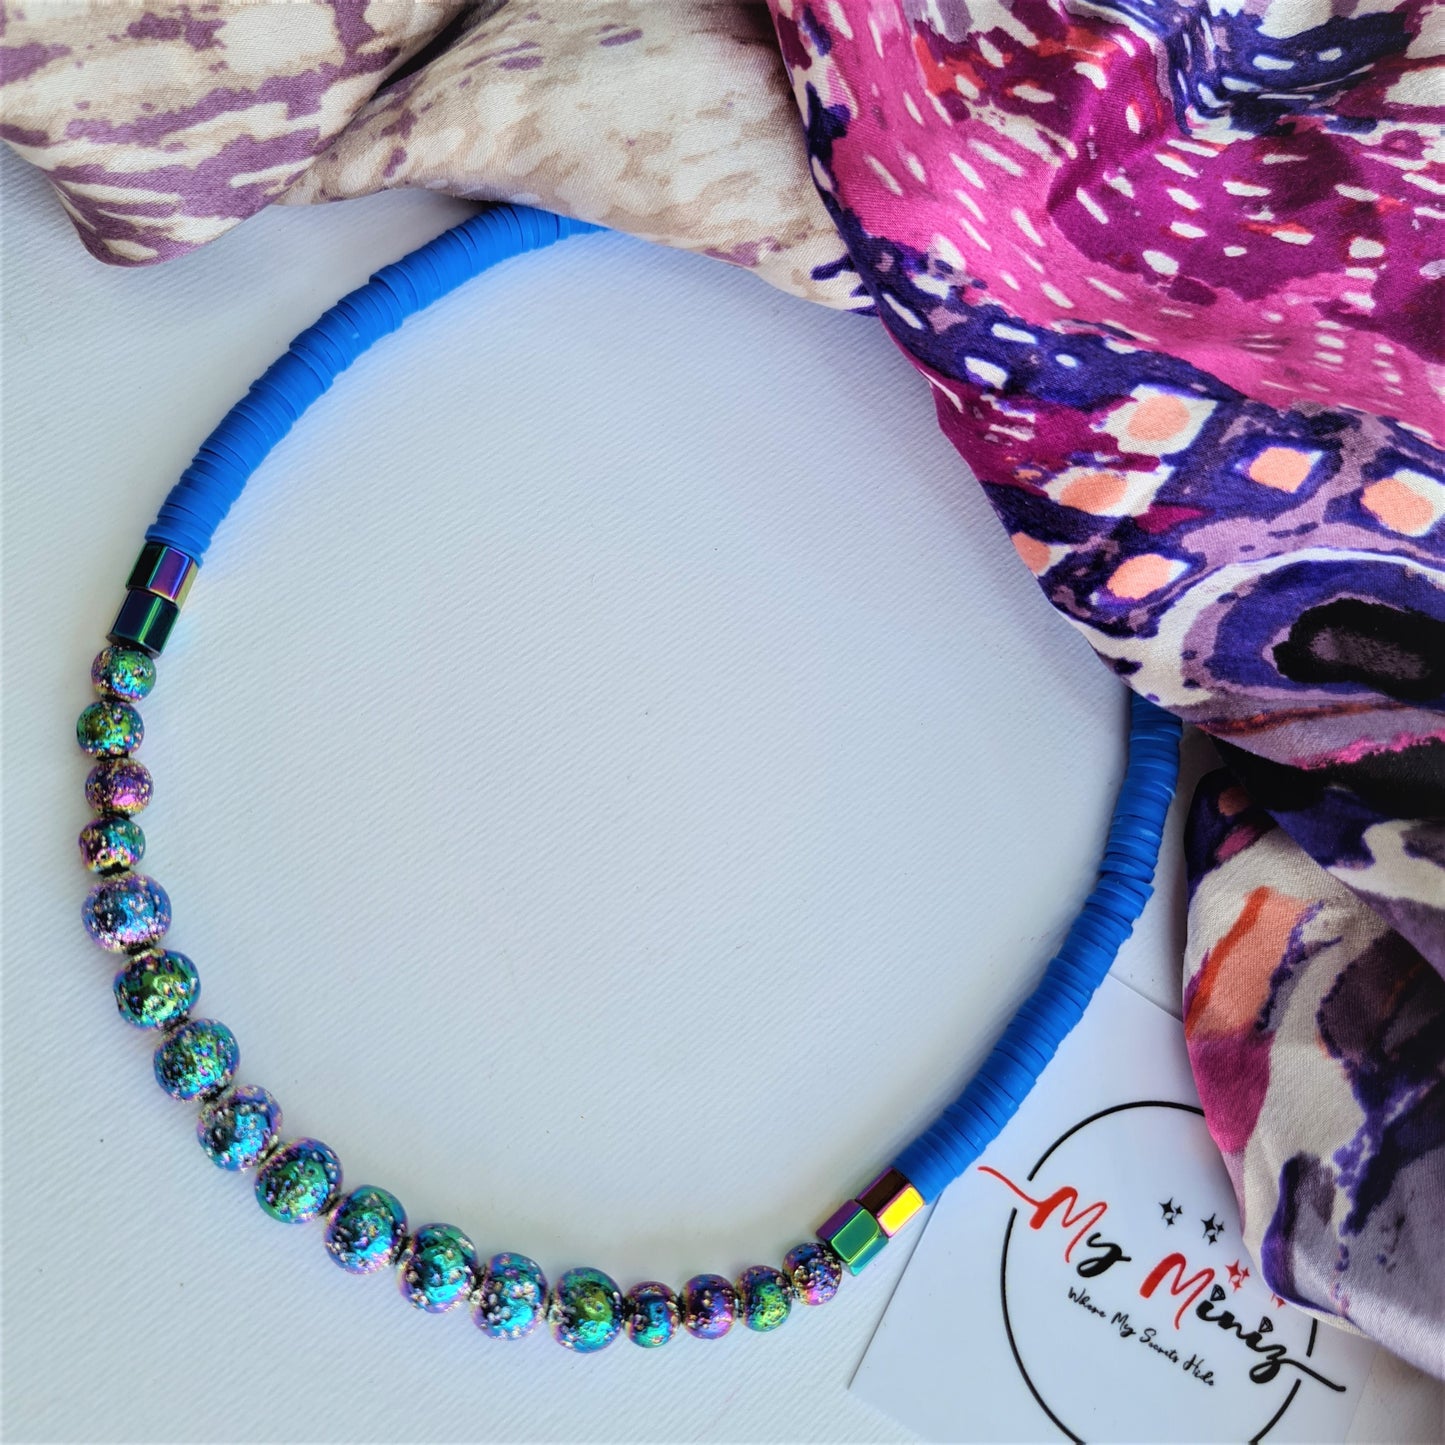 Surfer beads "Galaxy" necklace